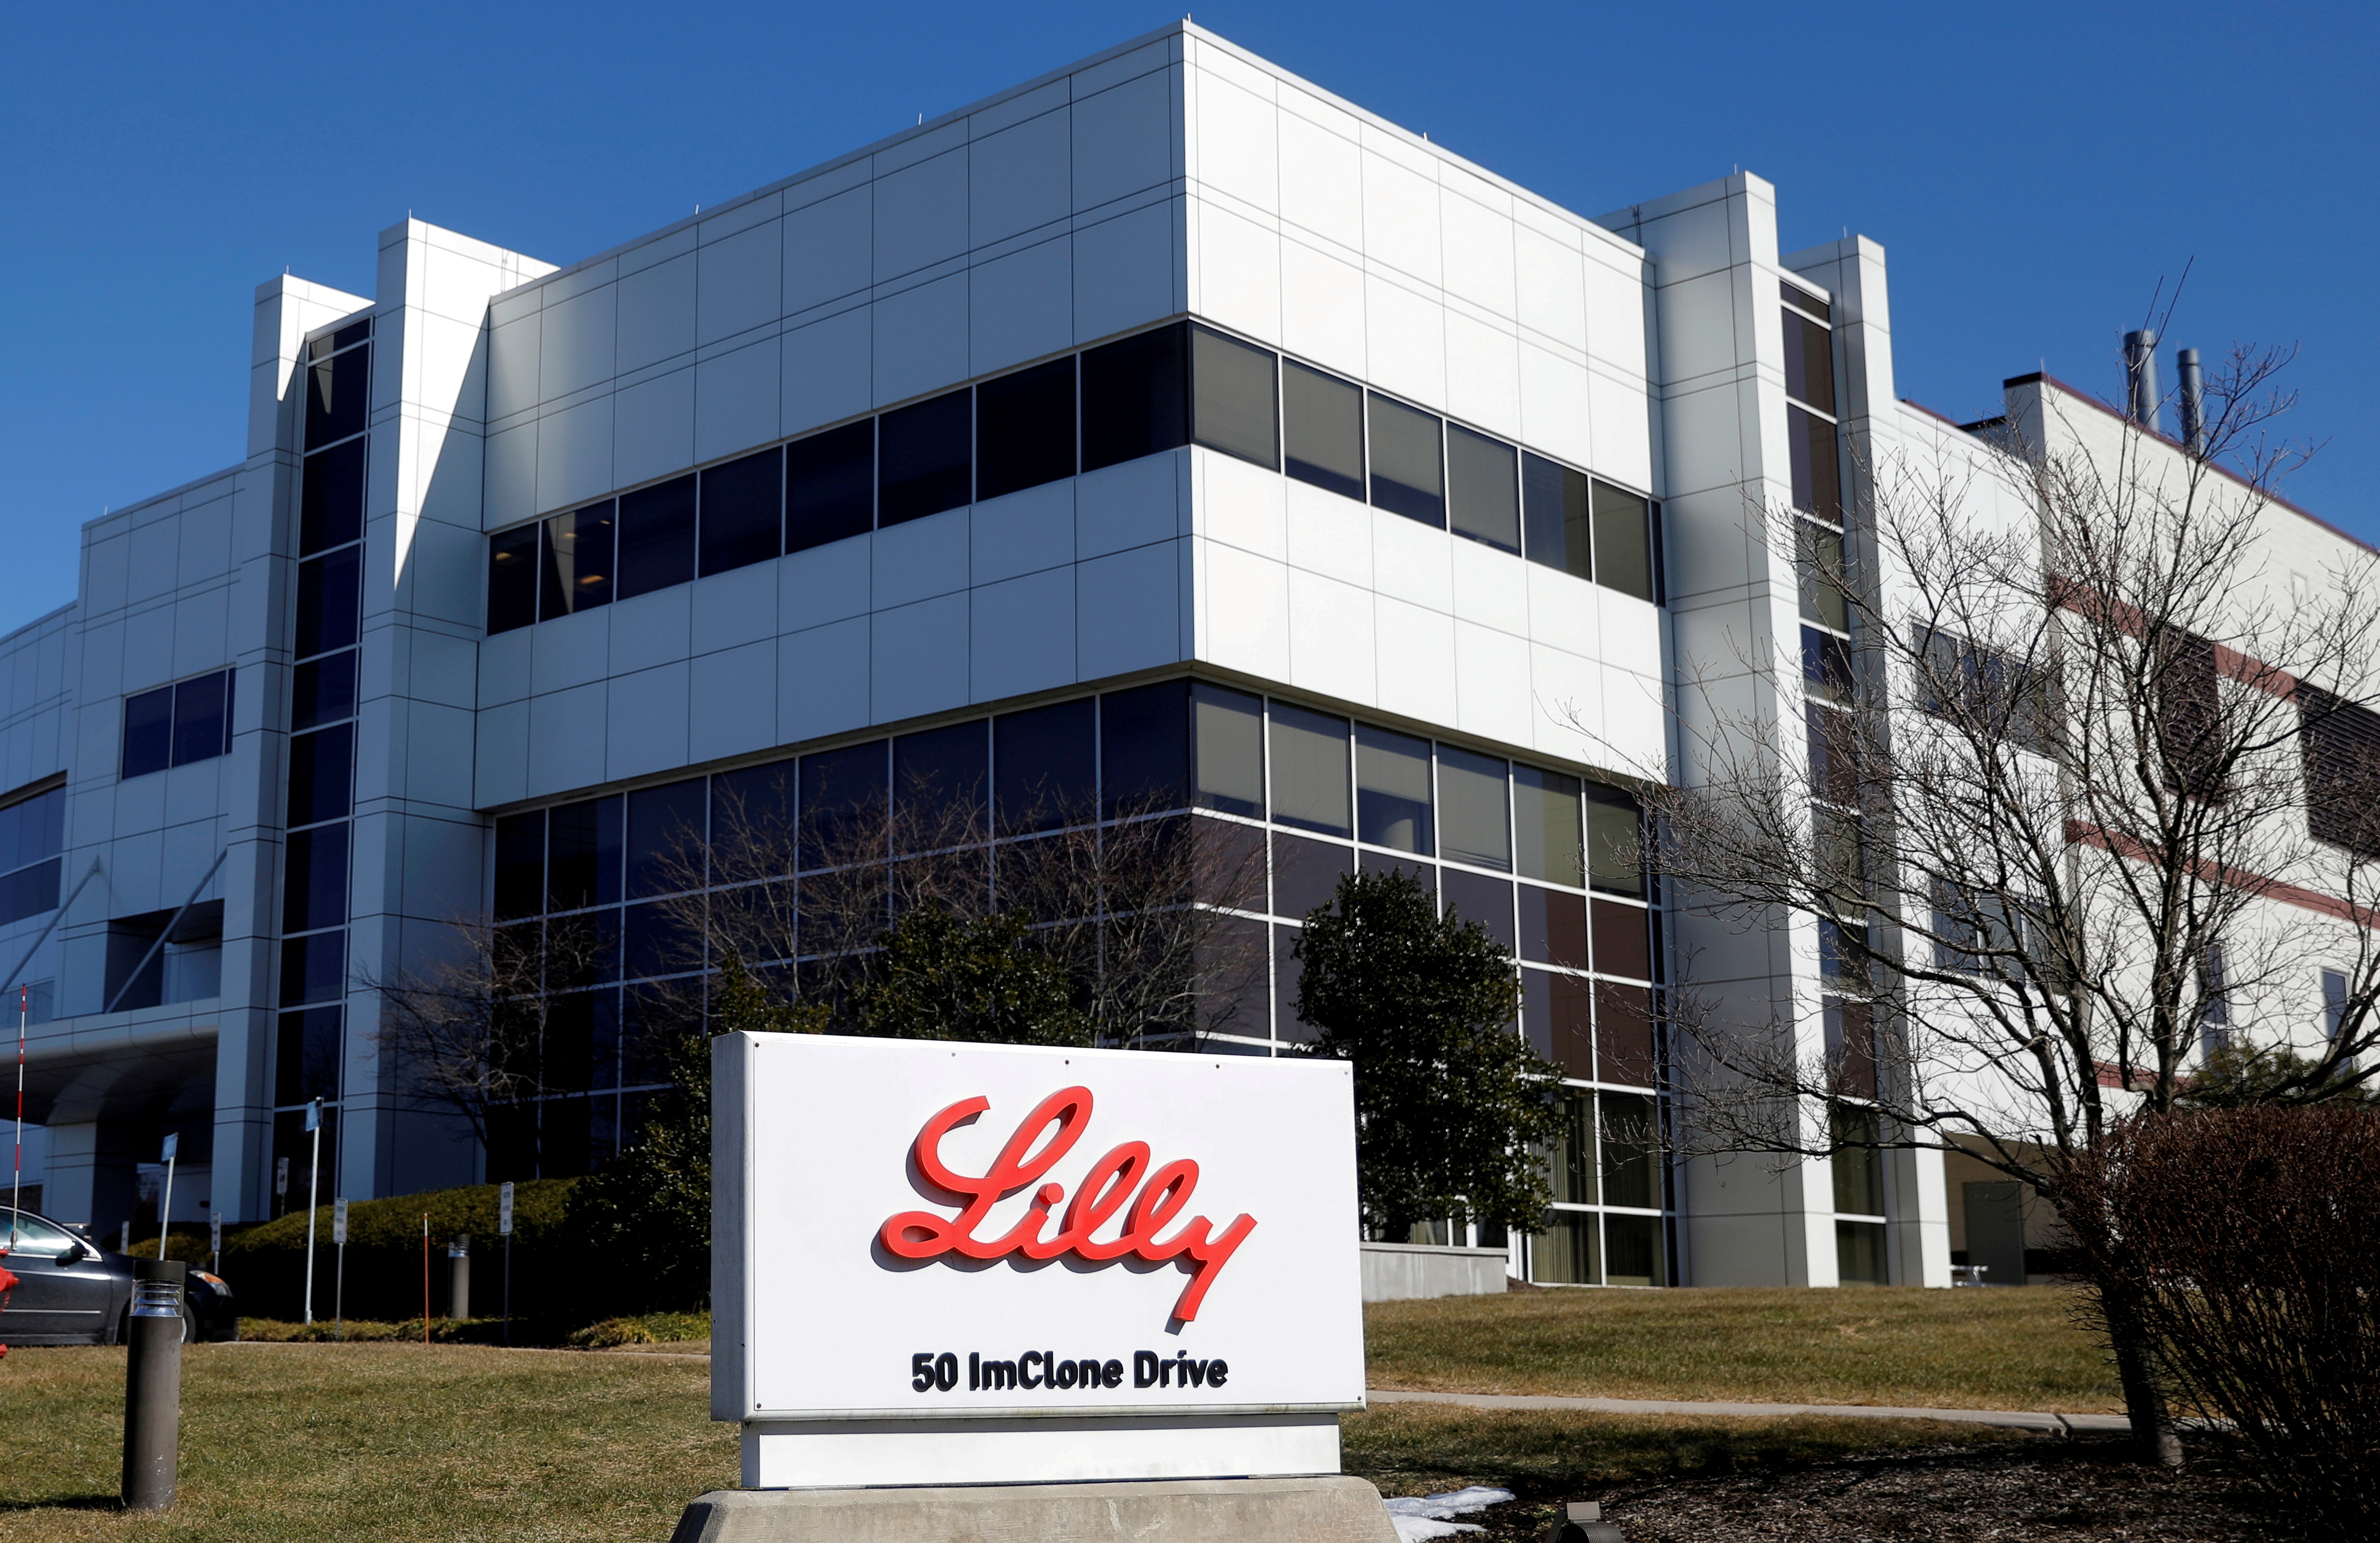 An Eli Lilly and Company pharmaceutical manufacturing plant is pictured at 50 ImClone Drive in Branchburg, New Jersey, March 5, 2021. REUTERS/Mike Segar